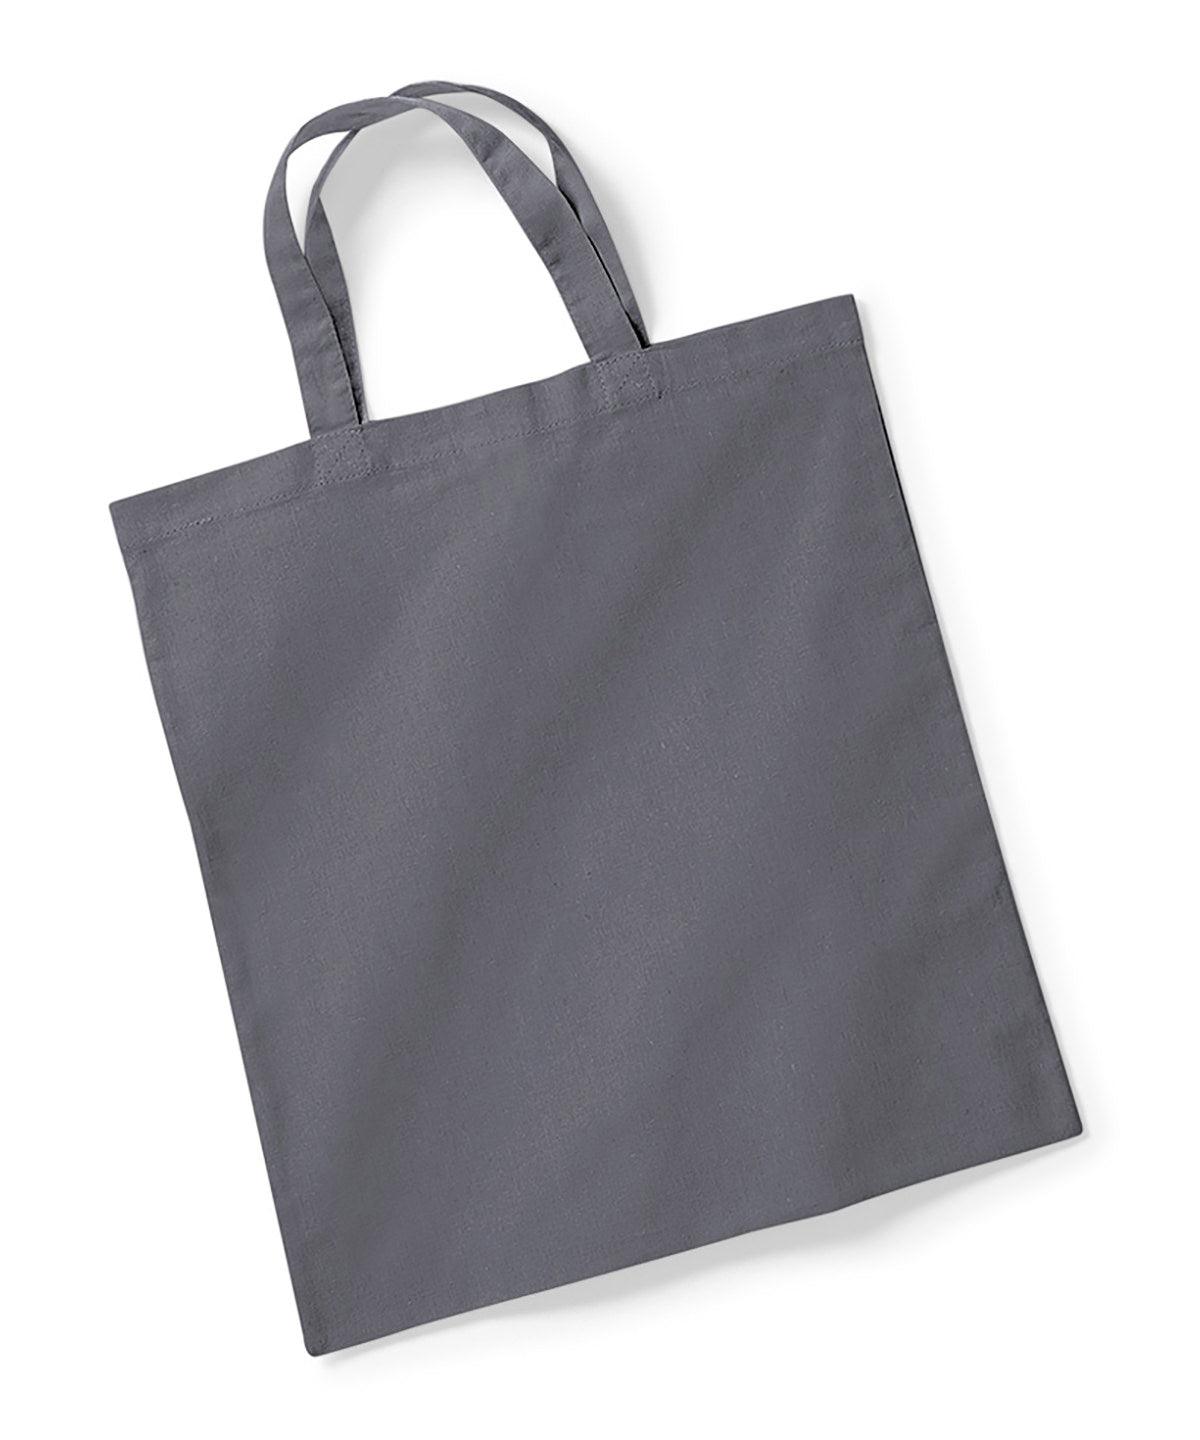 Graphite Grey - Bag for life - short handles Bags Westford Mill Bags & Luggage, Raladeal - High Stock Schoolwear Centres